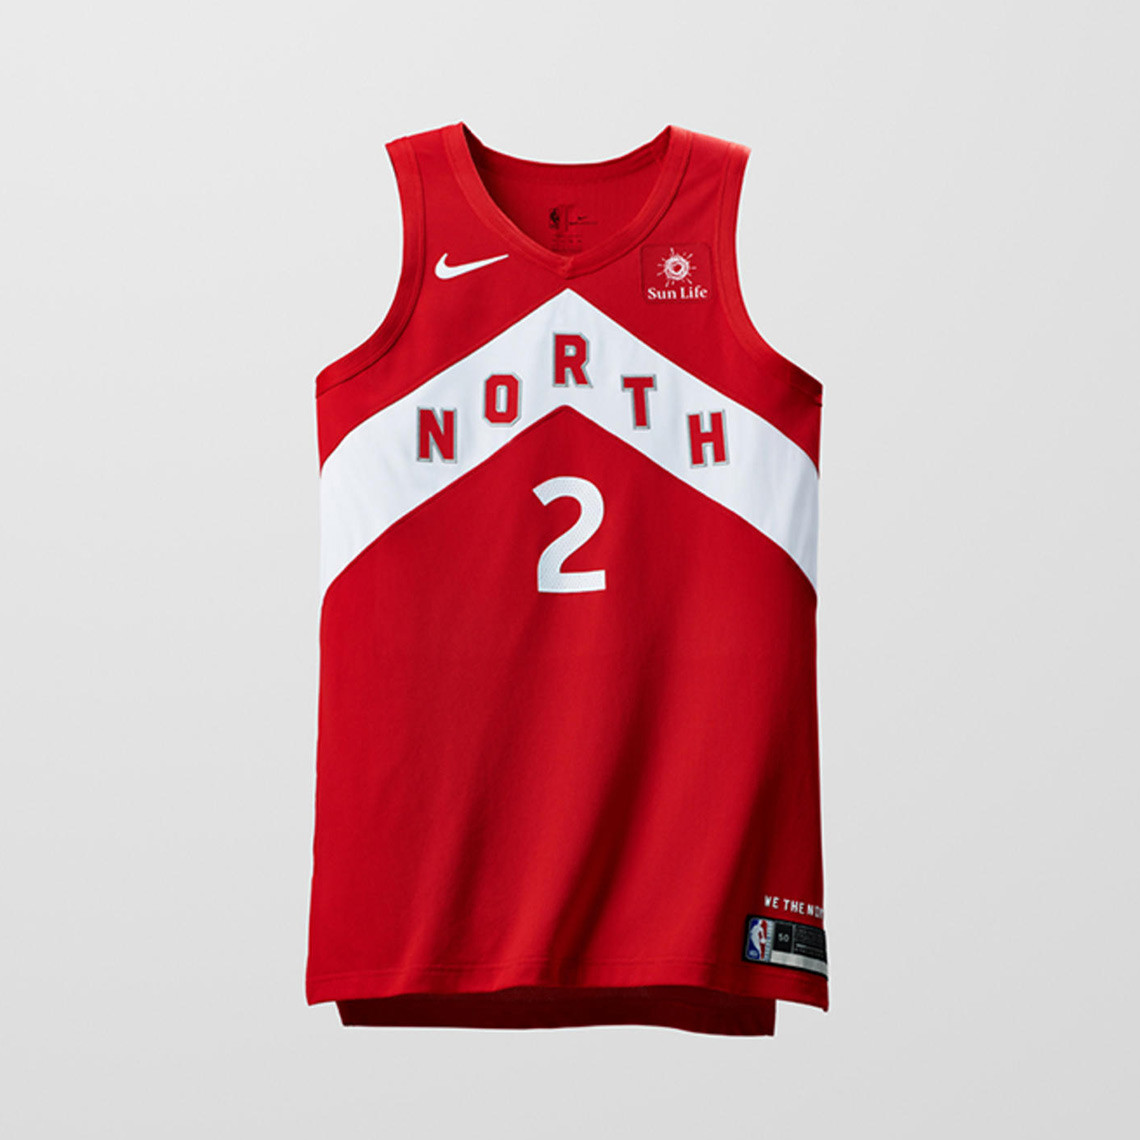 A look at special NBA jerseys reserved for last year's playoff teams